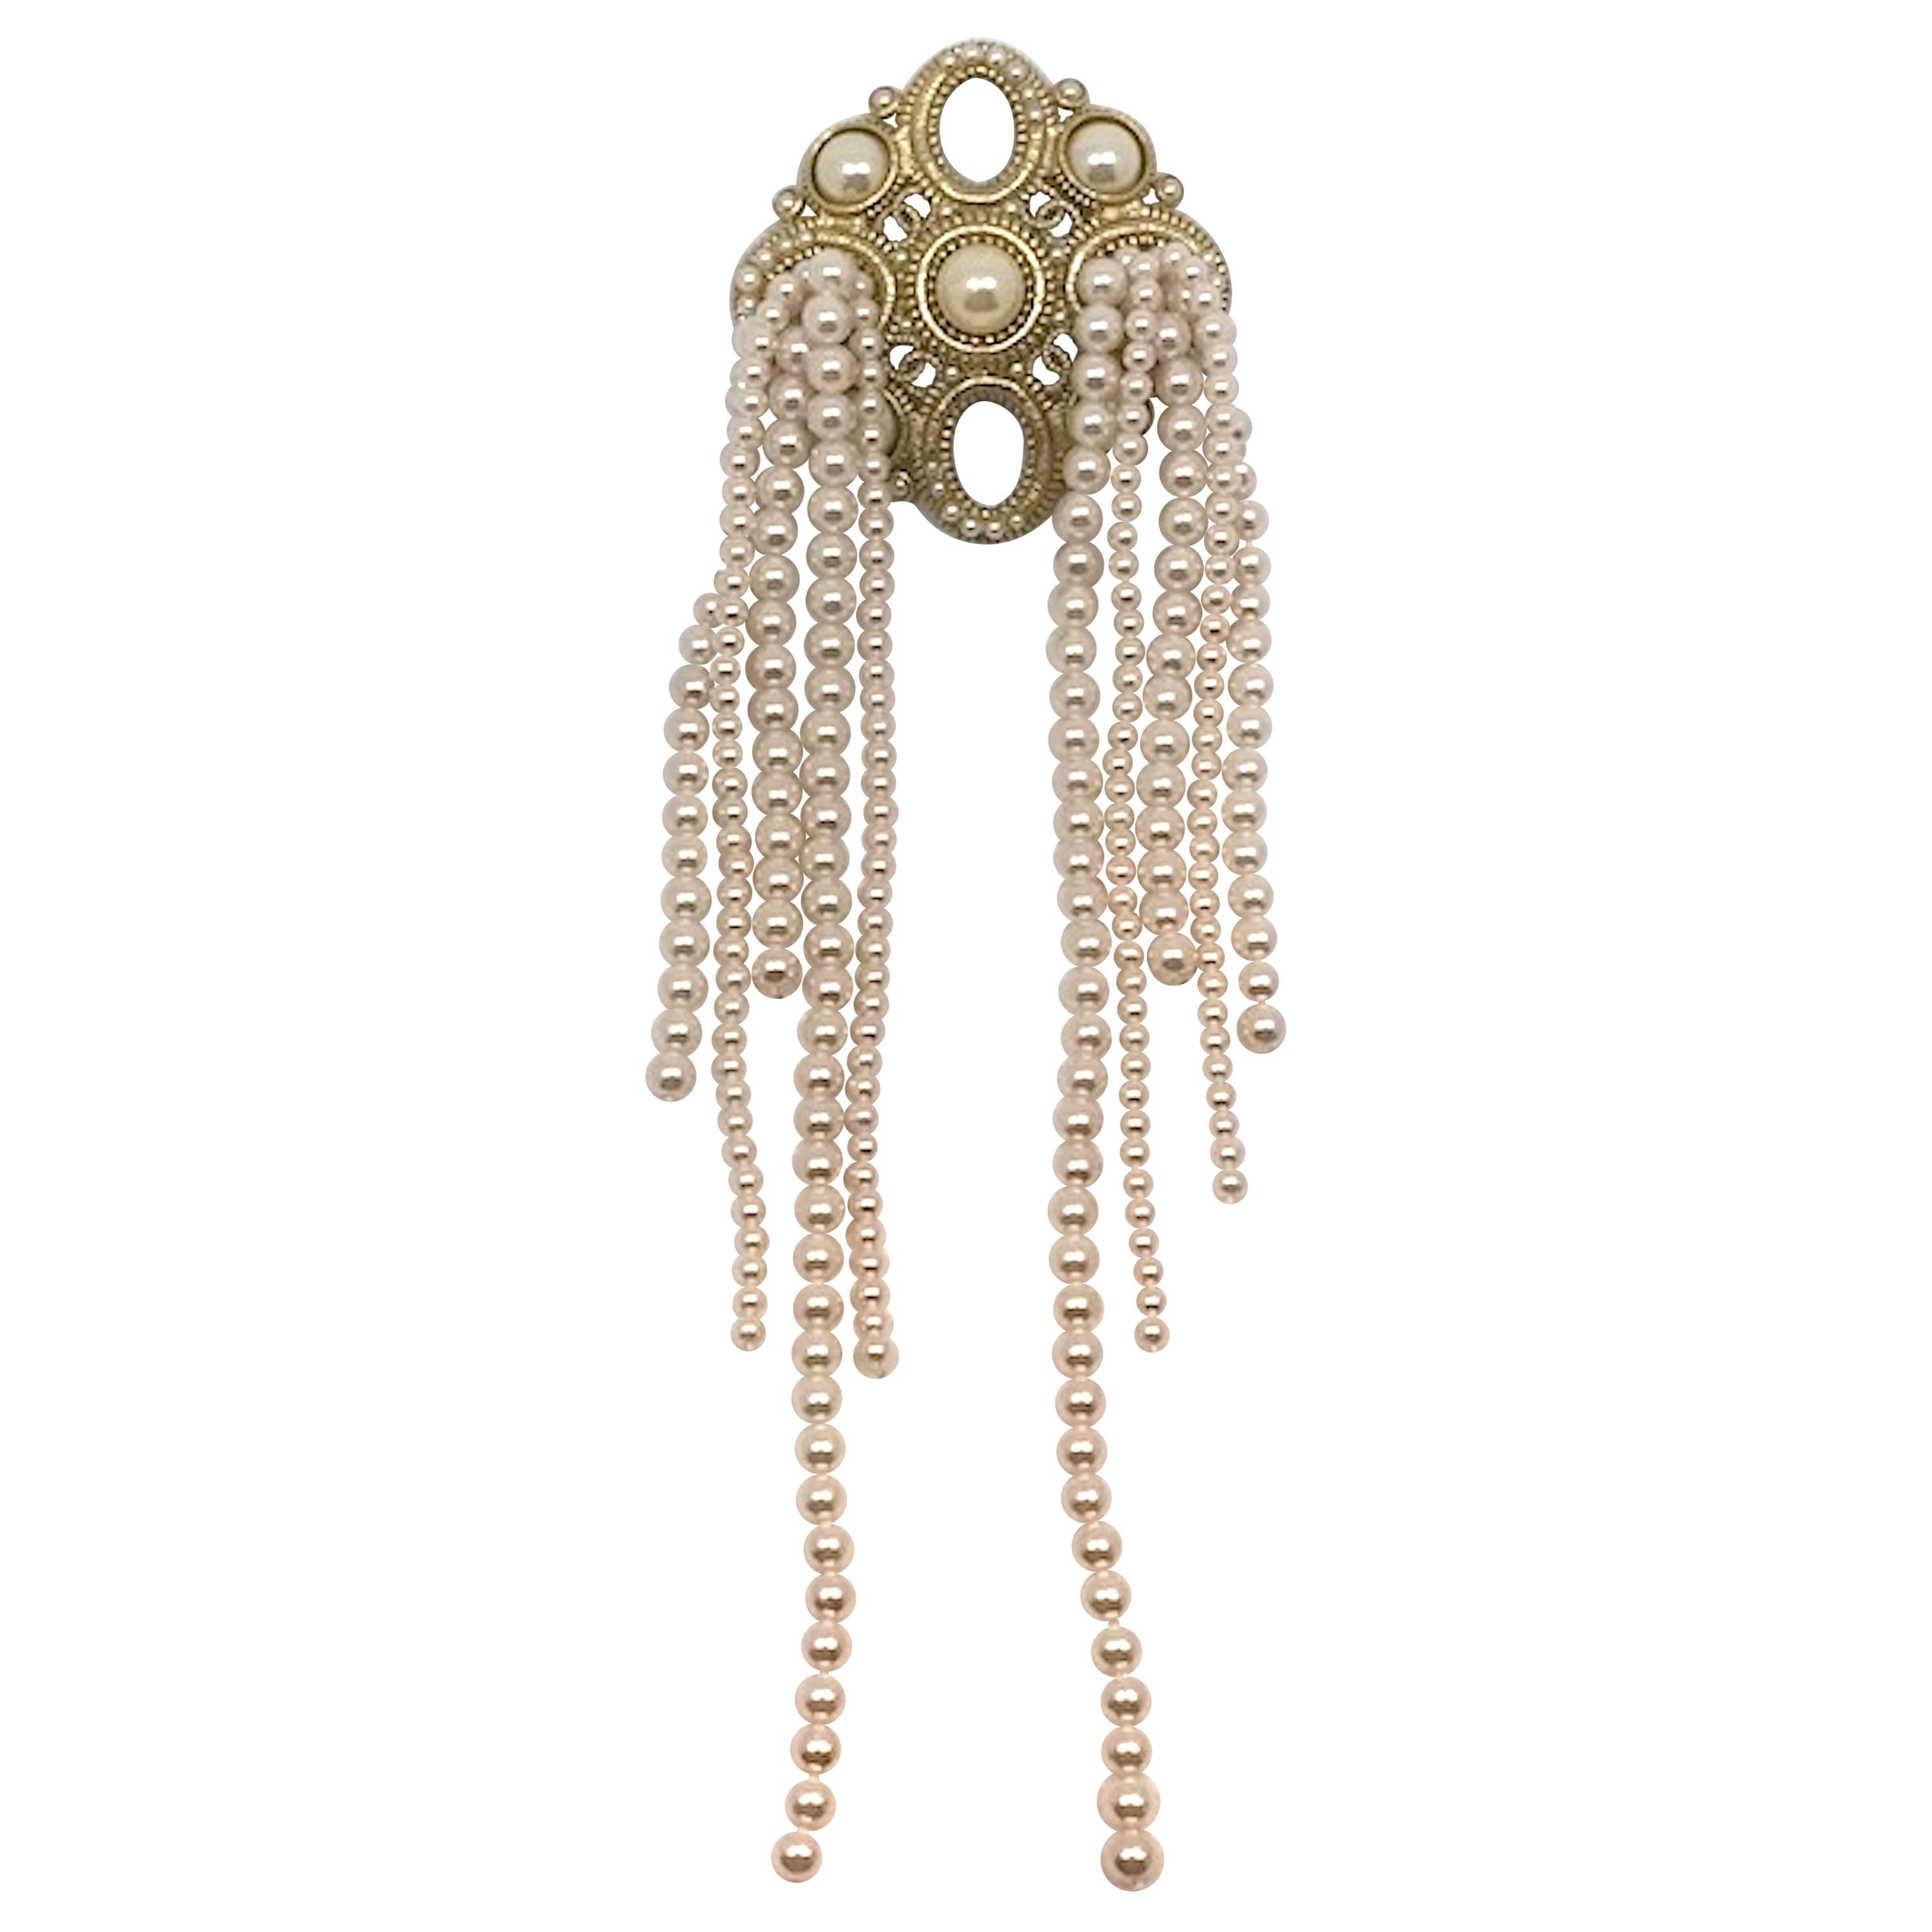 Chanel Dramatic & Large Medallion with Pearl Fringe Pin, 2015 Collection